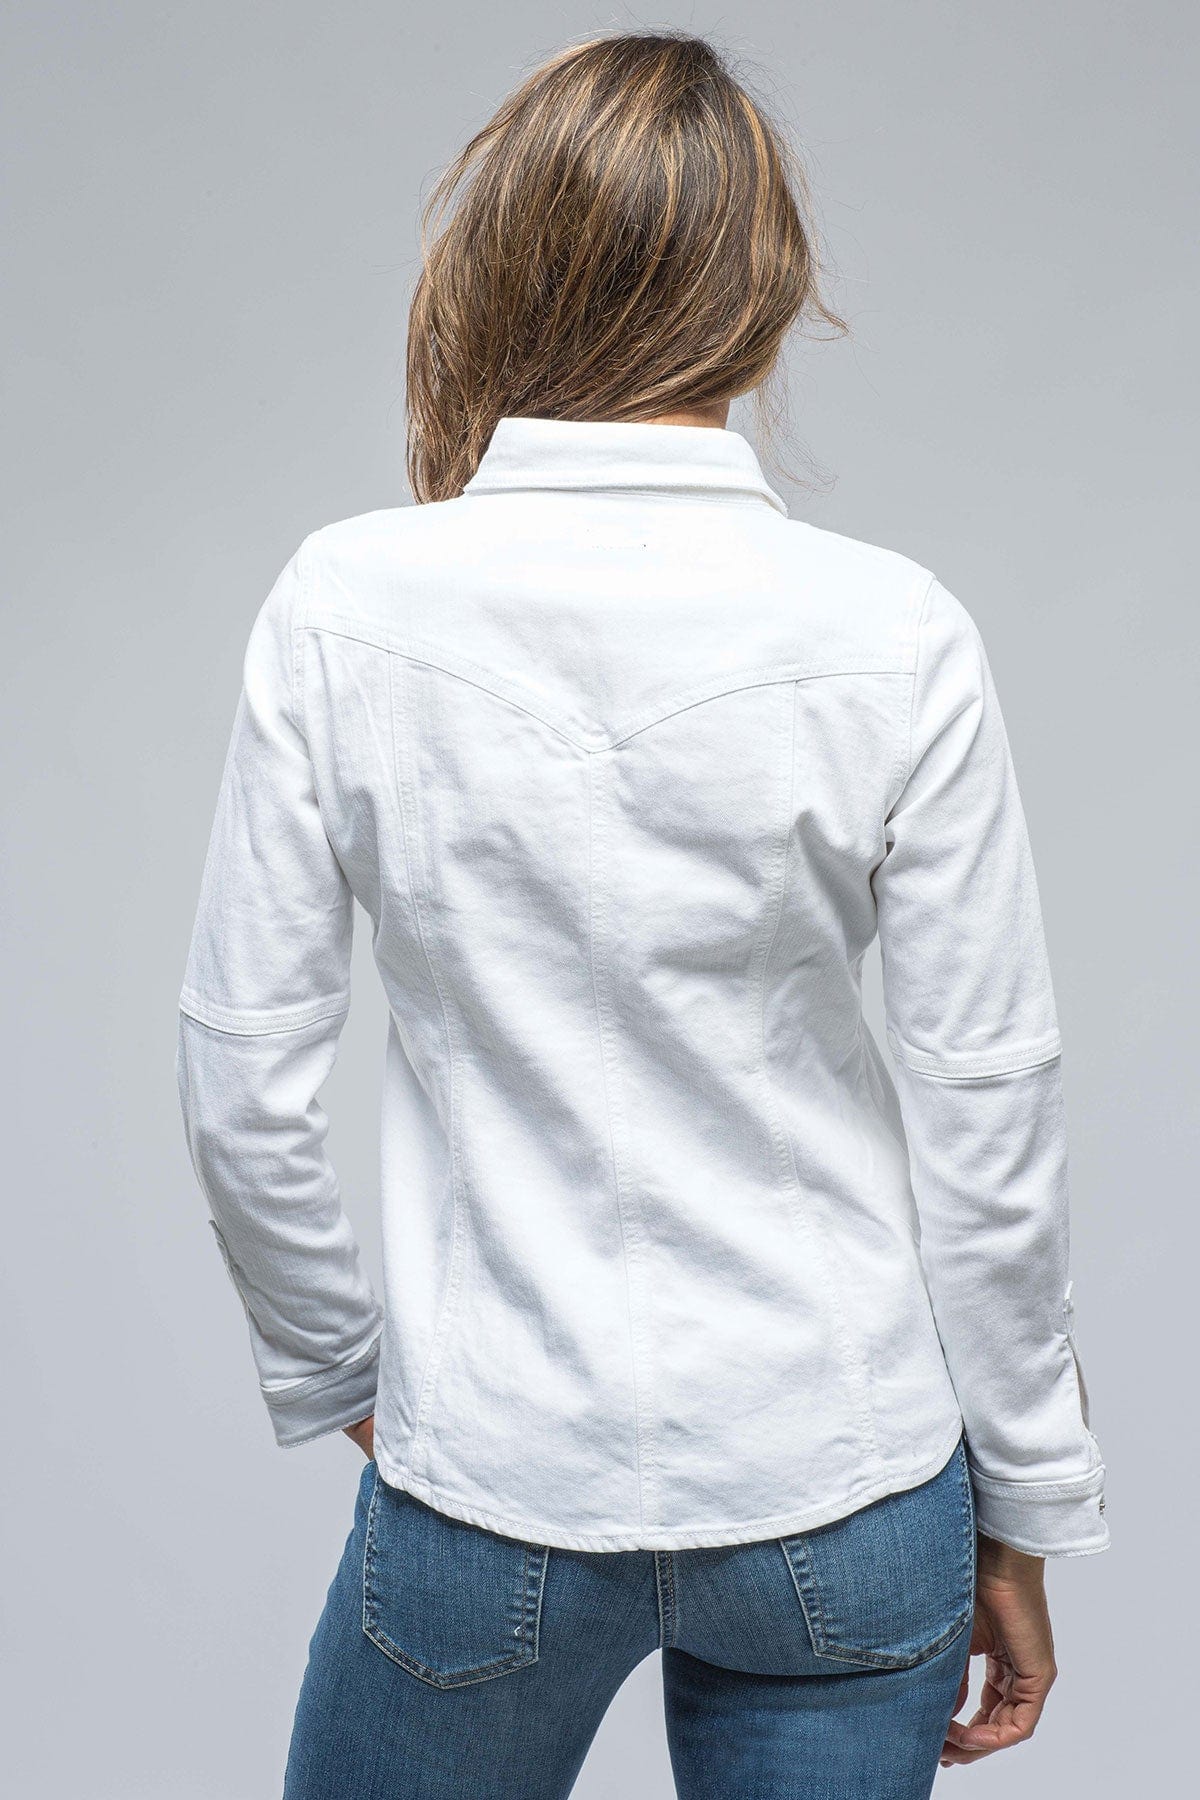 Sweetwater Denim Shirt In White - AXEL'S